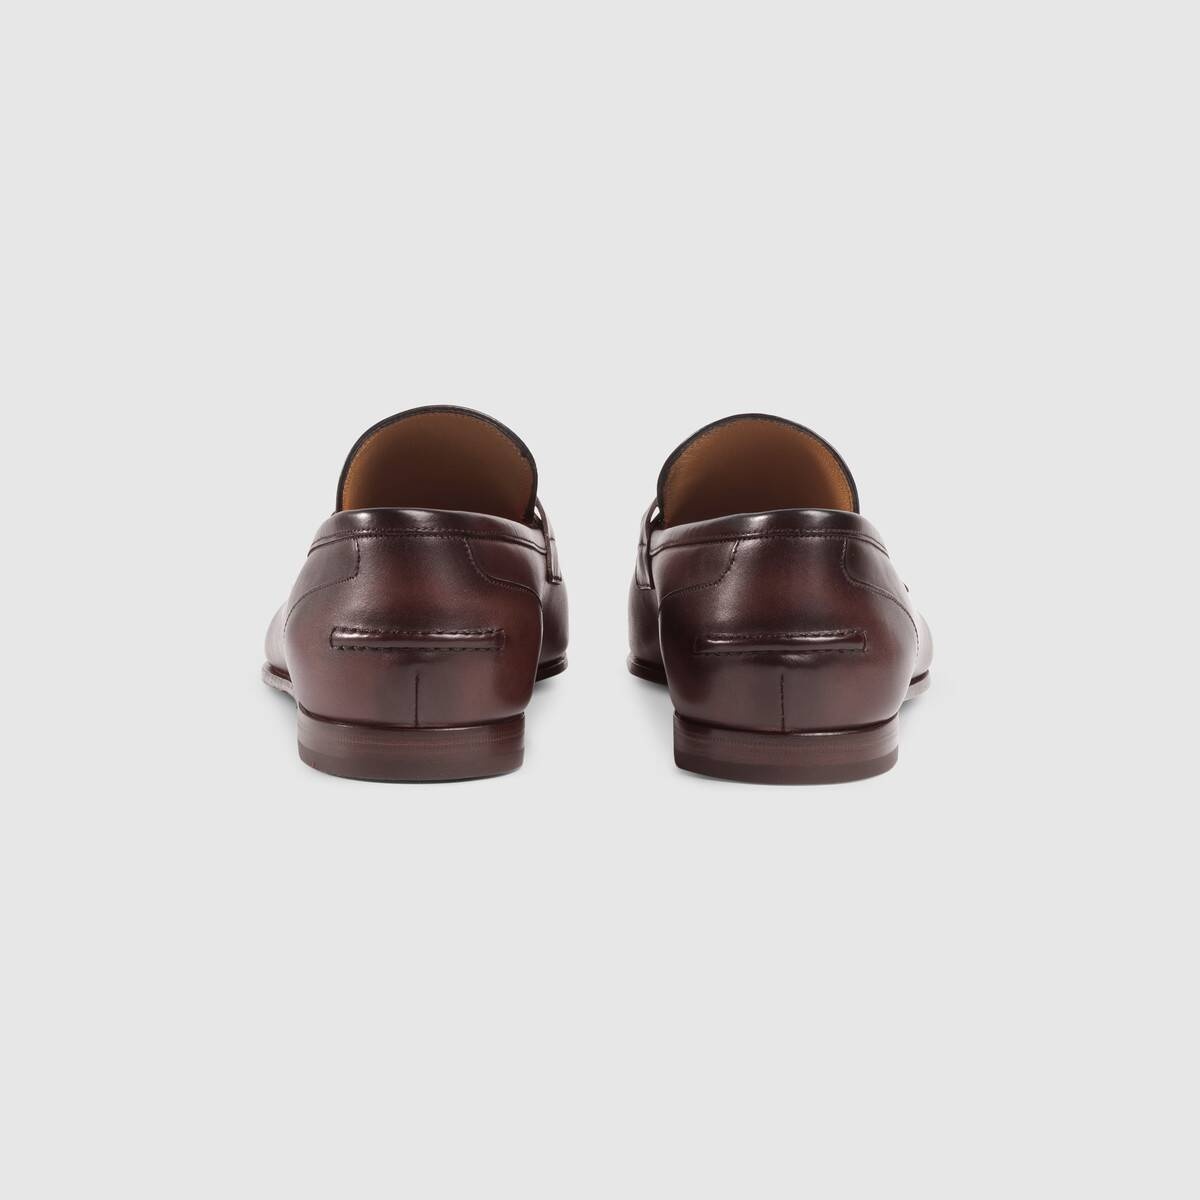 Gucci Jordaan leather loafer - 4